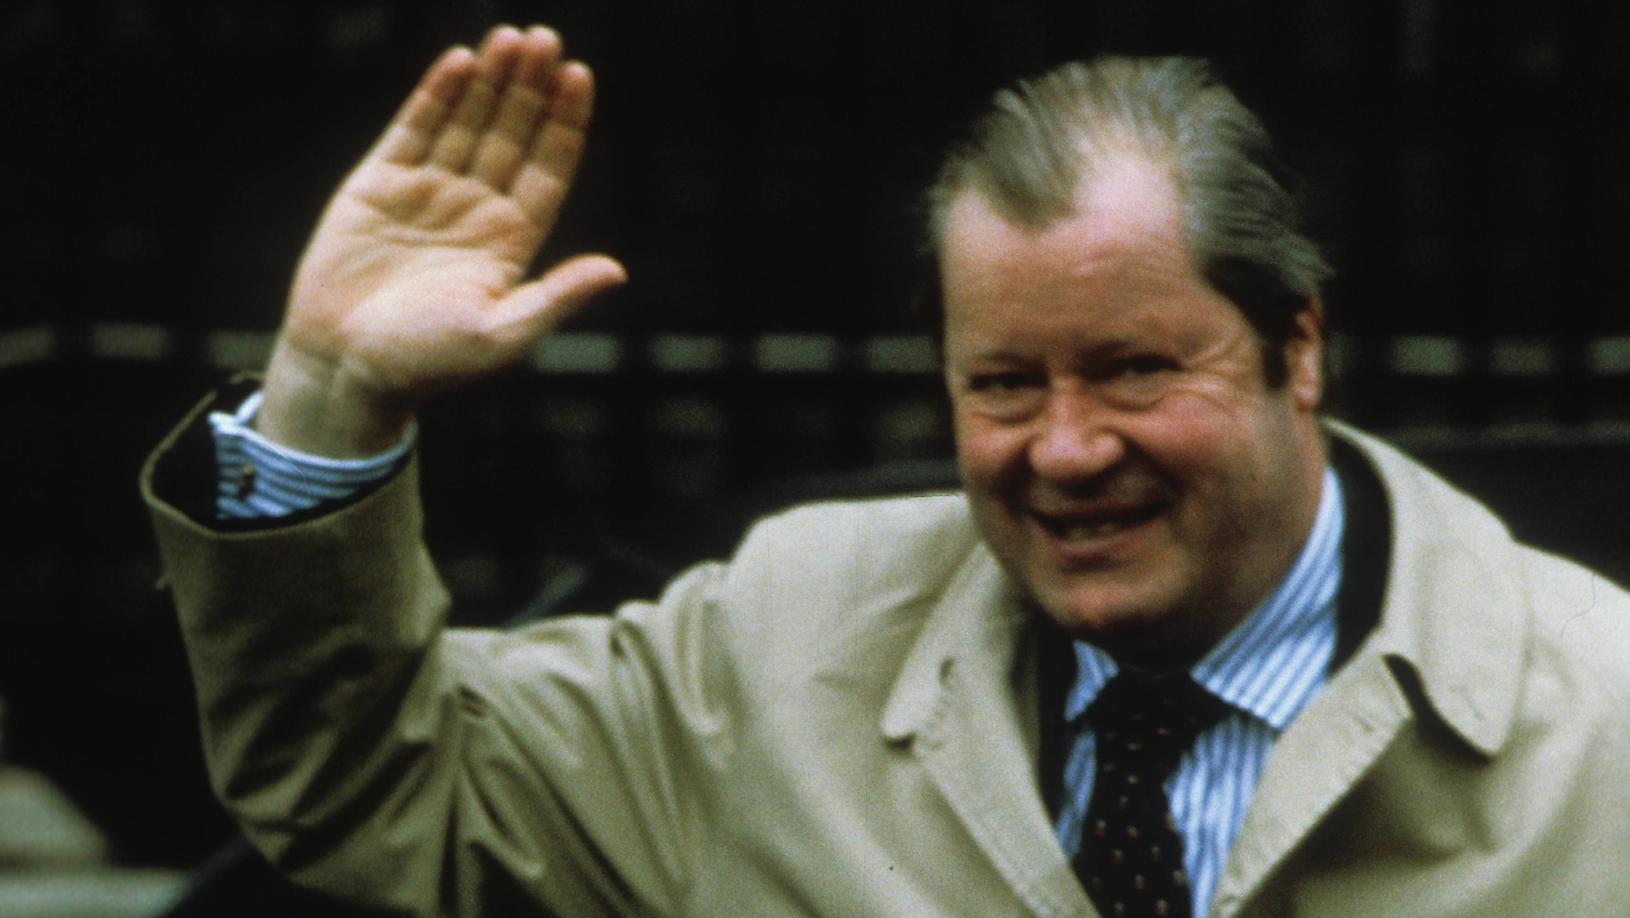 Johnnie Spencer, 8th Earl Spencer, father of Princess Diana, leaves St Mary's Hospital after visiting his newborn grandson, William Arthur Philip Louis London, UK, 22nd June 1982